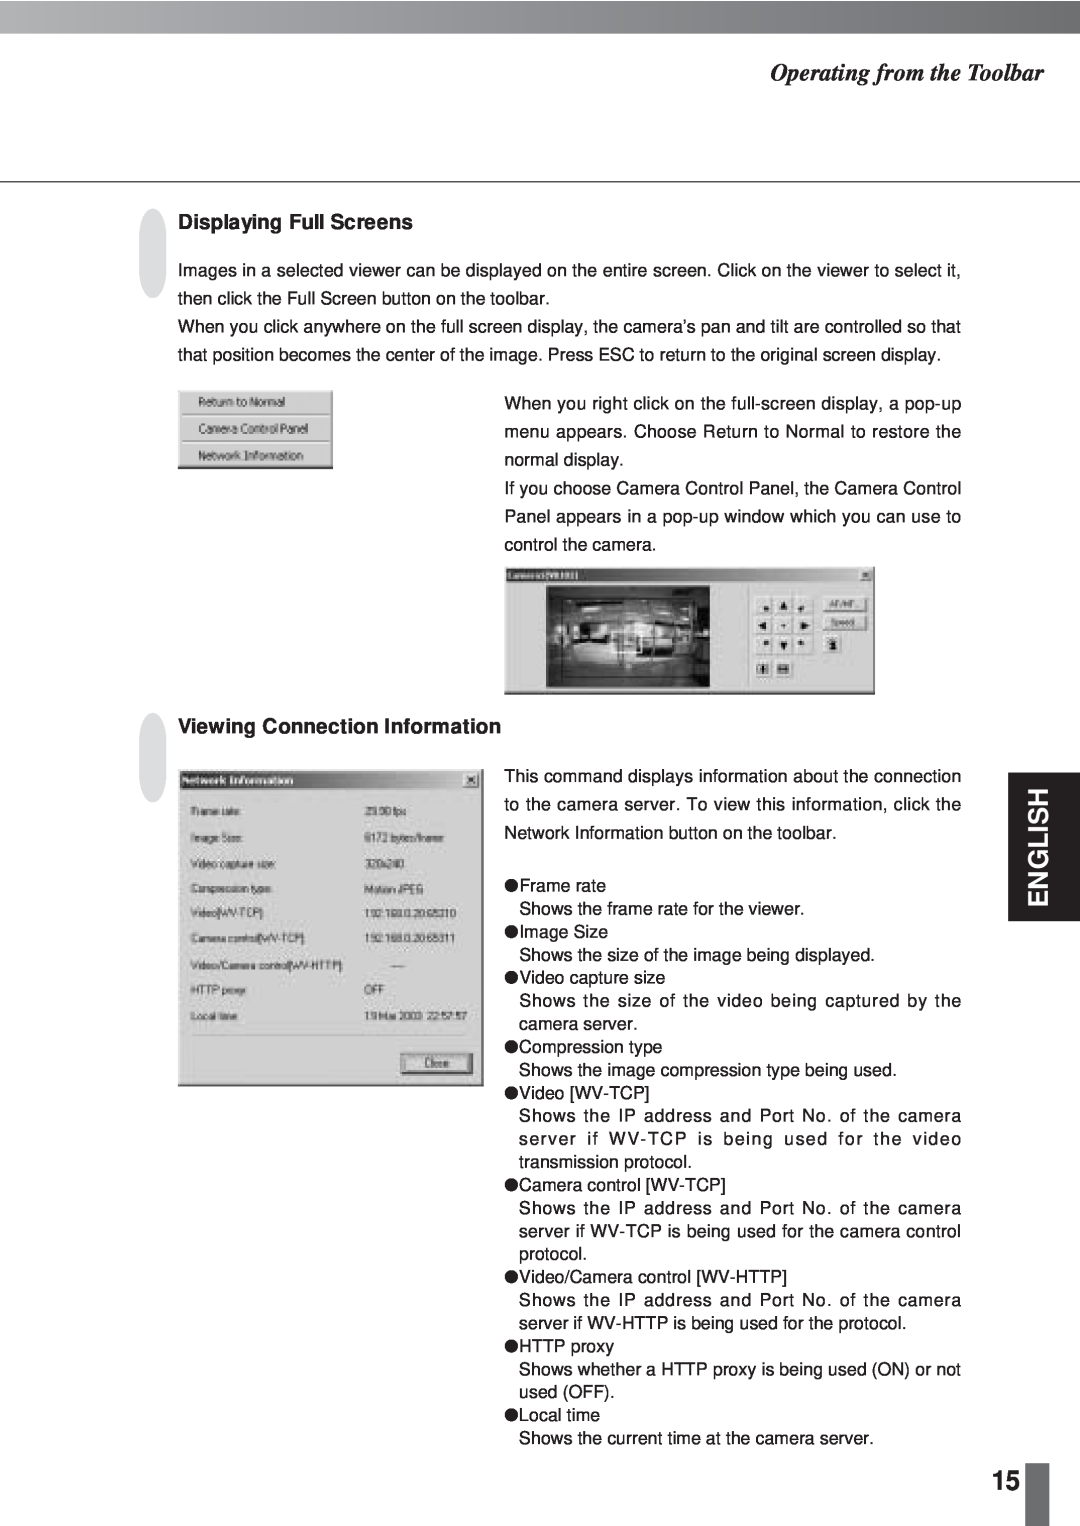 Canon 2.1 user manual English, Operating from the Toolbar, Displaying Full Screens, Viewing Connection Information 